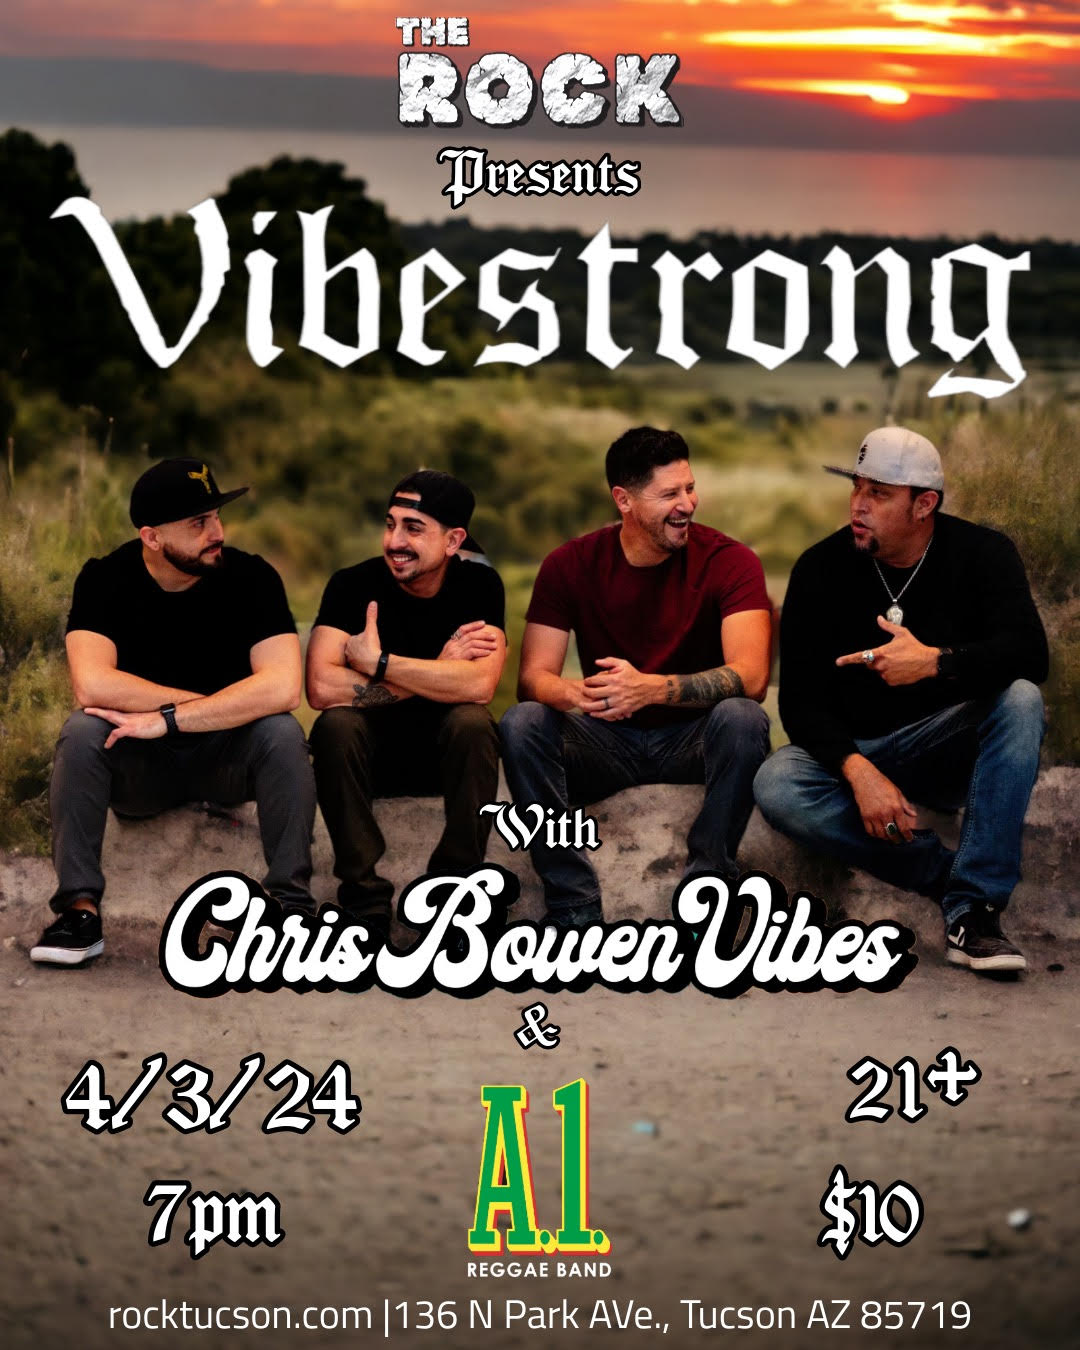 Vibestrong